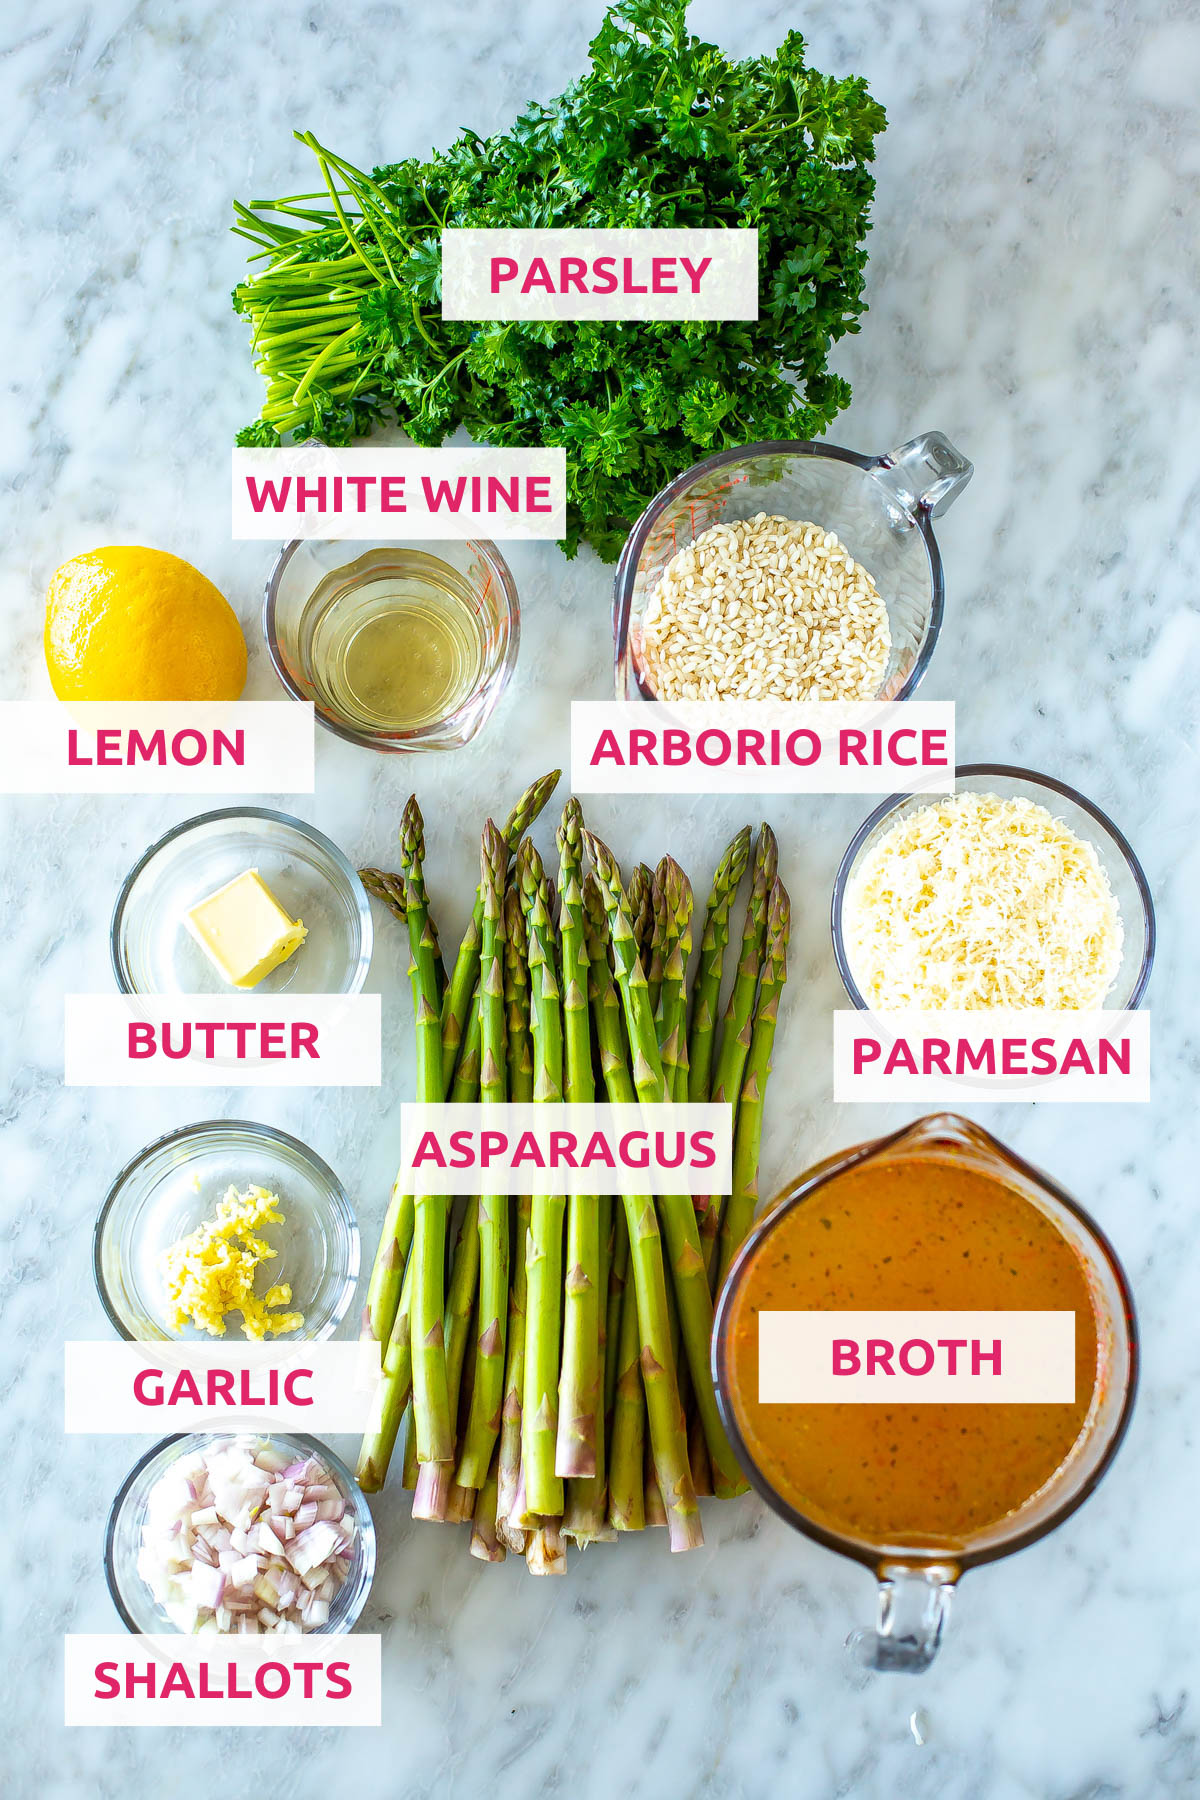 Ingredients for asparagus risotto: parsley, asparagus, parmesan cheese, arborio rice, broth, white wine, lemon, shallots, garlic and butter.